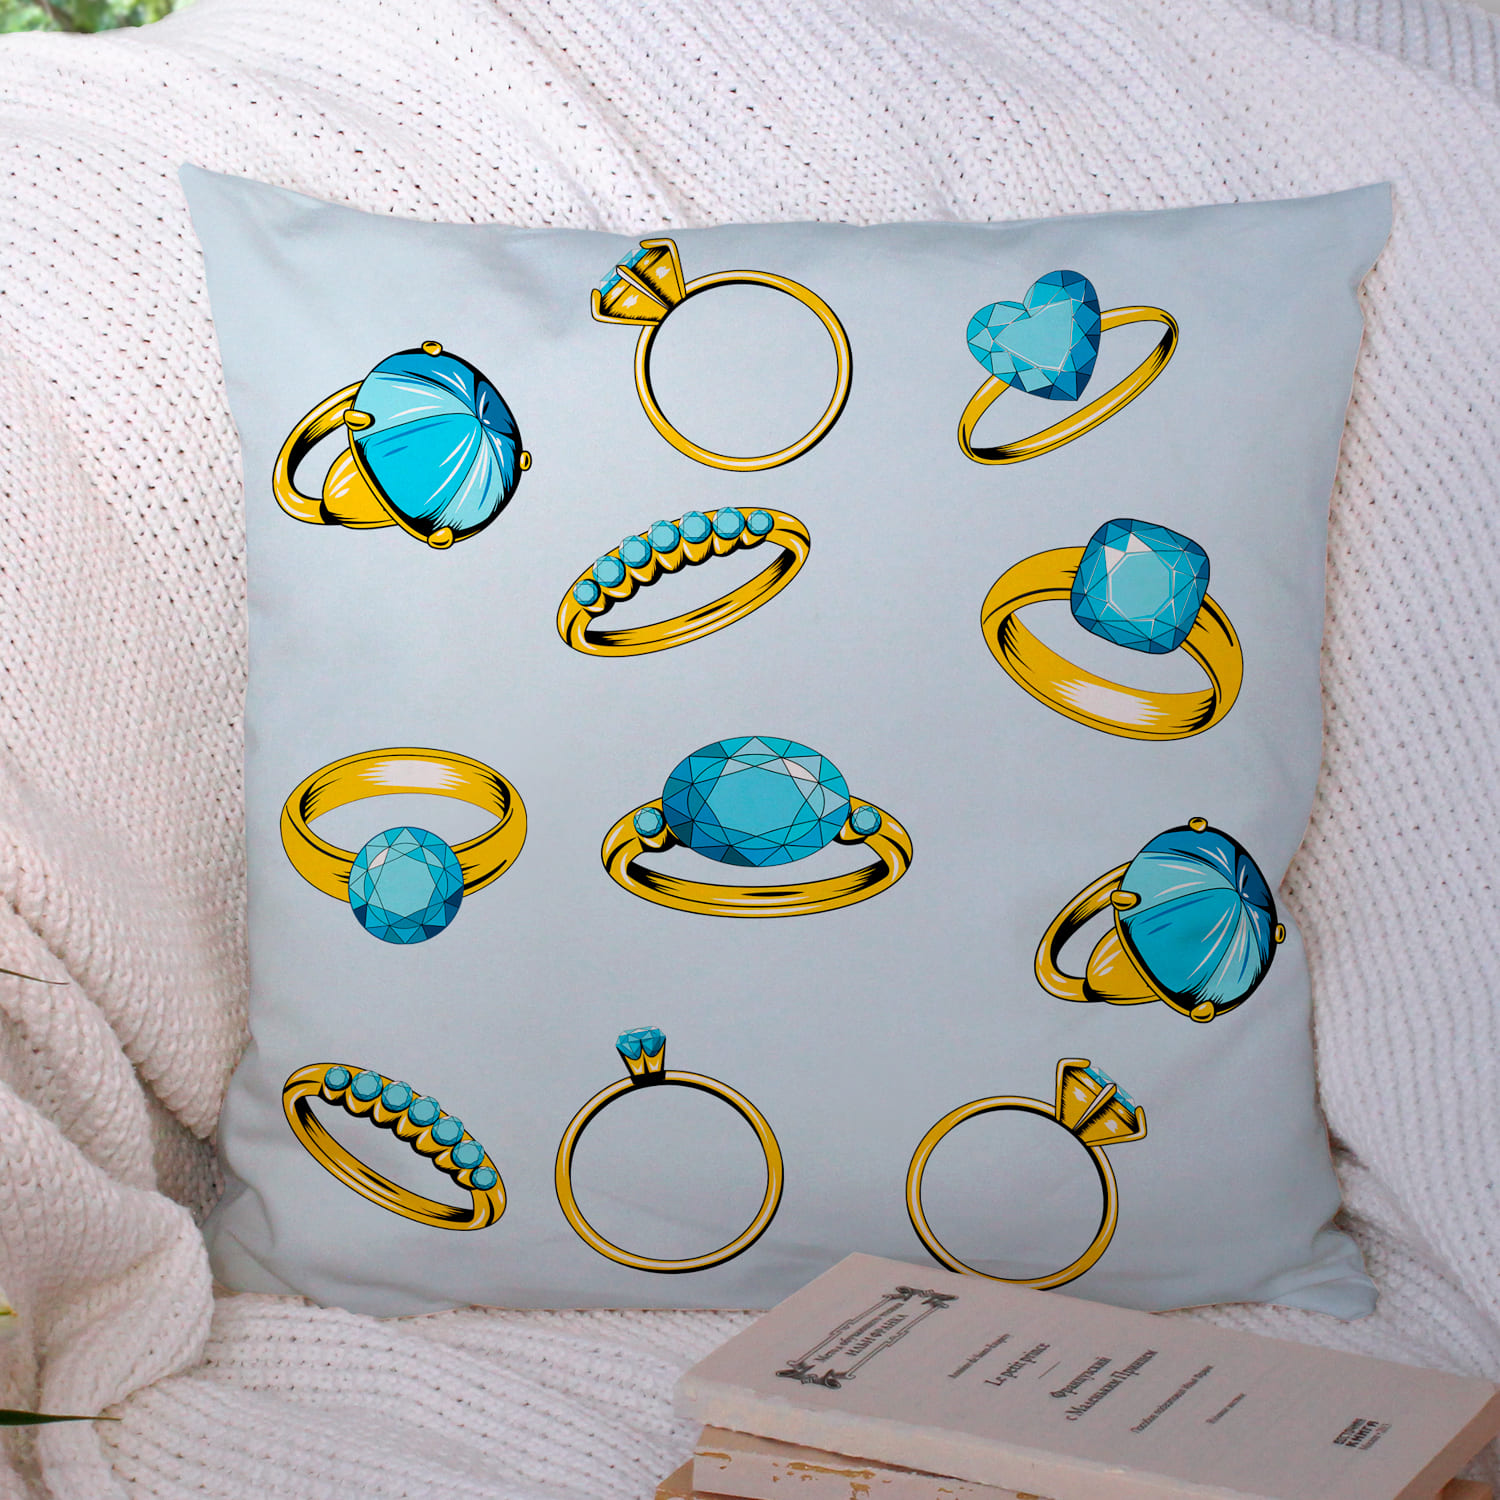 Blue pillow with a diamond ring.